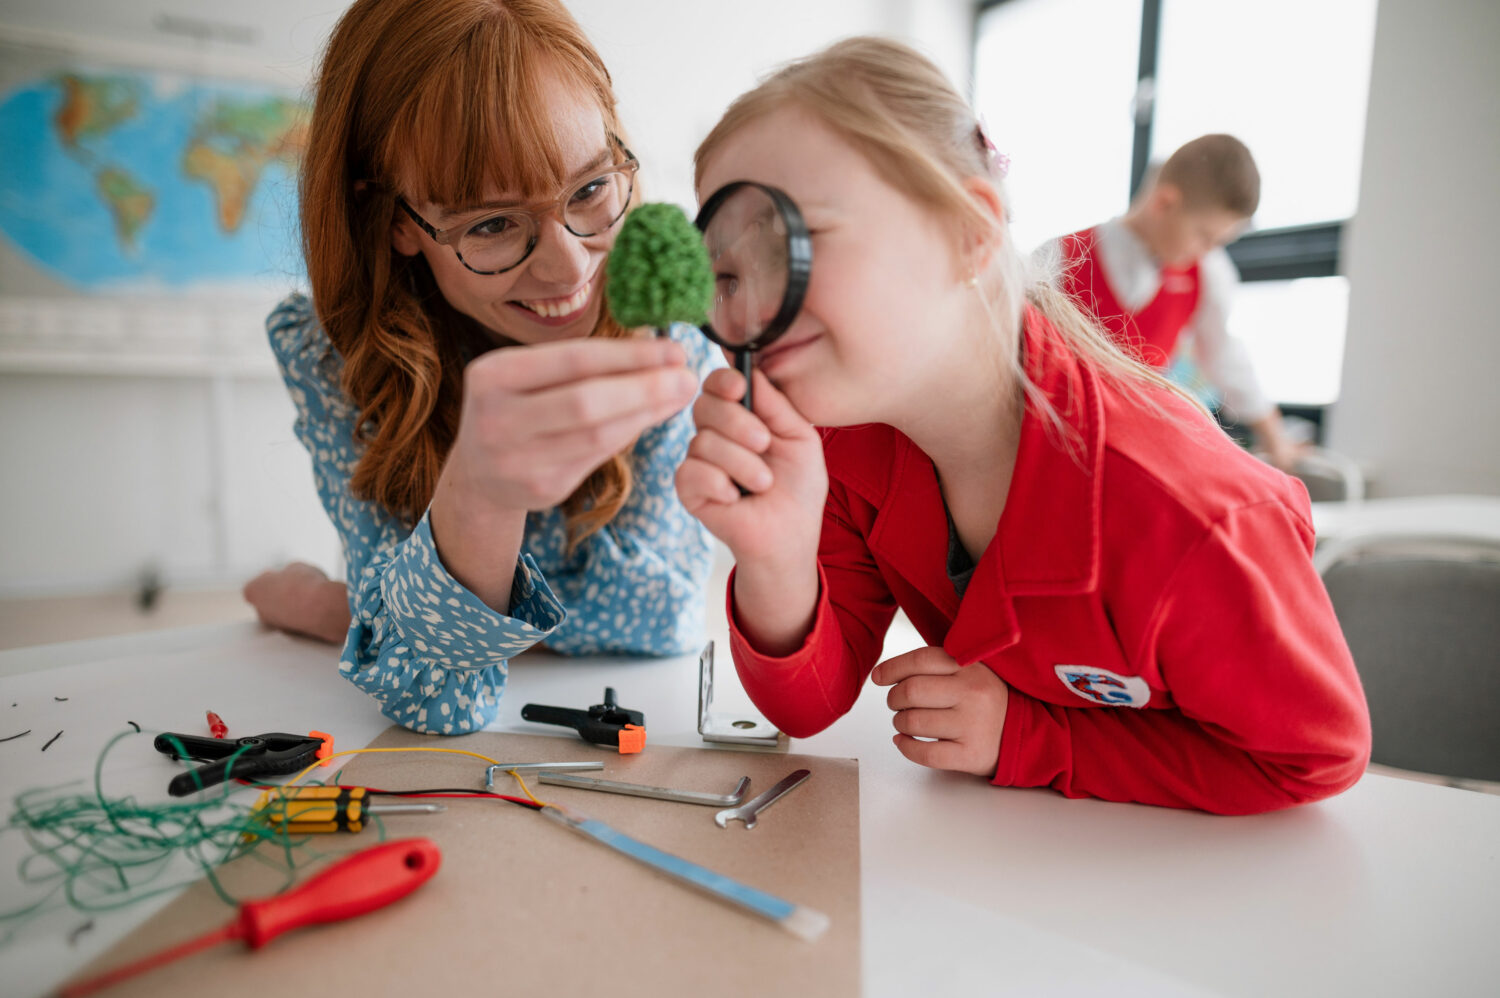 female student with Down syndrome wearing red sweater looks through magnifying glass with assistance from her female teacher